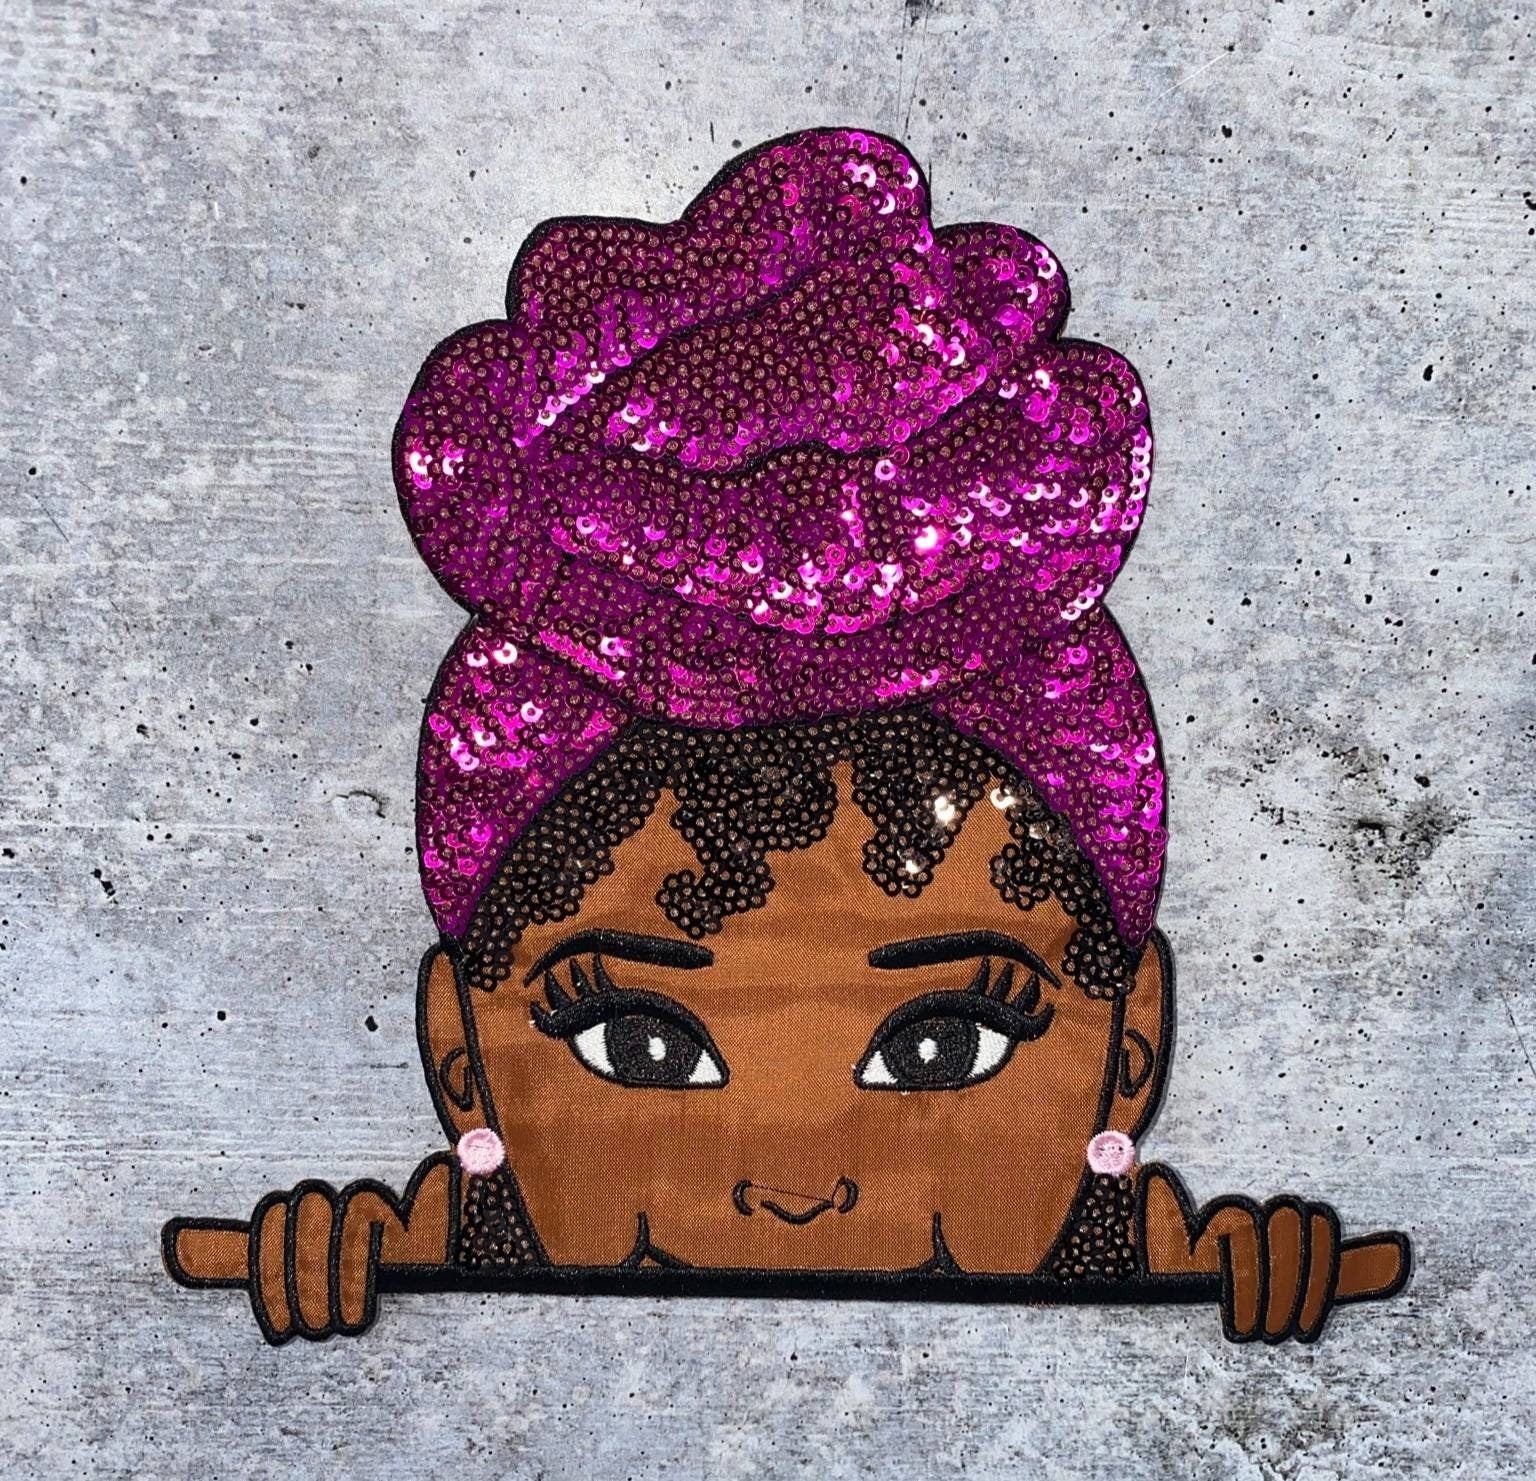 New, SEQUINS & Satin Peek-a-boo "Sasha" 7"x7.6" Patch, Iron-on/Sew-on, Exclusive Applique, Patch for Girls Jacket, Bling Patch